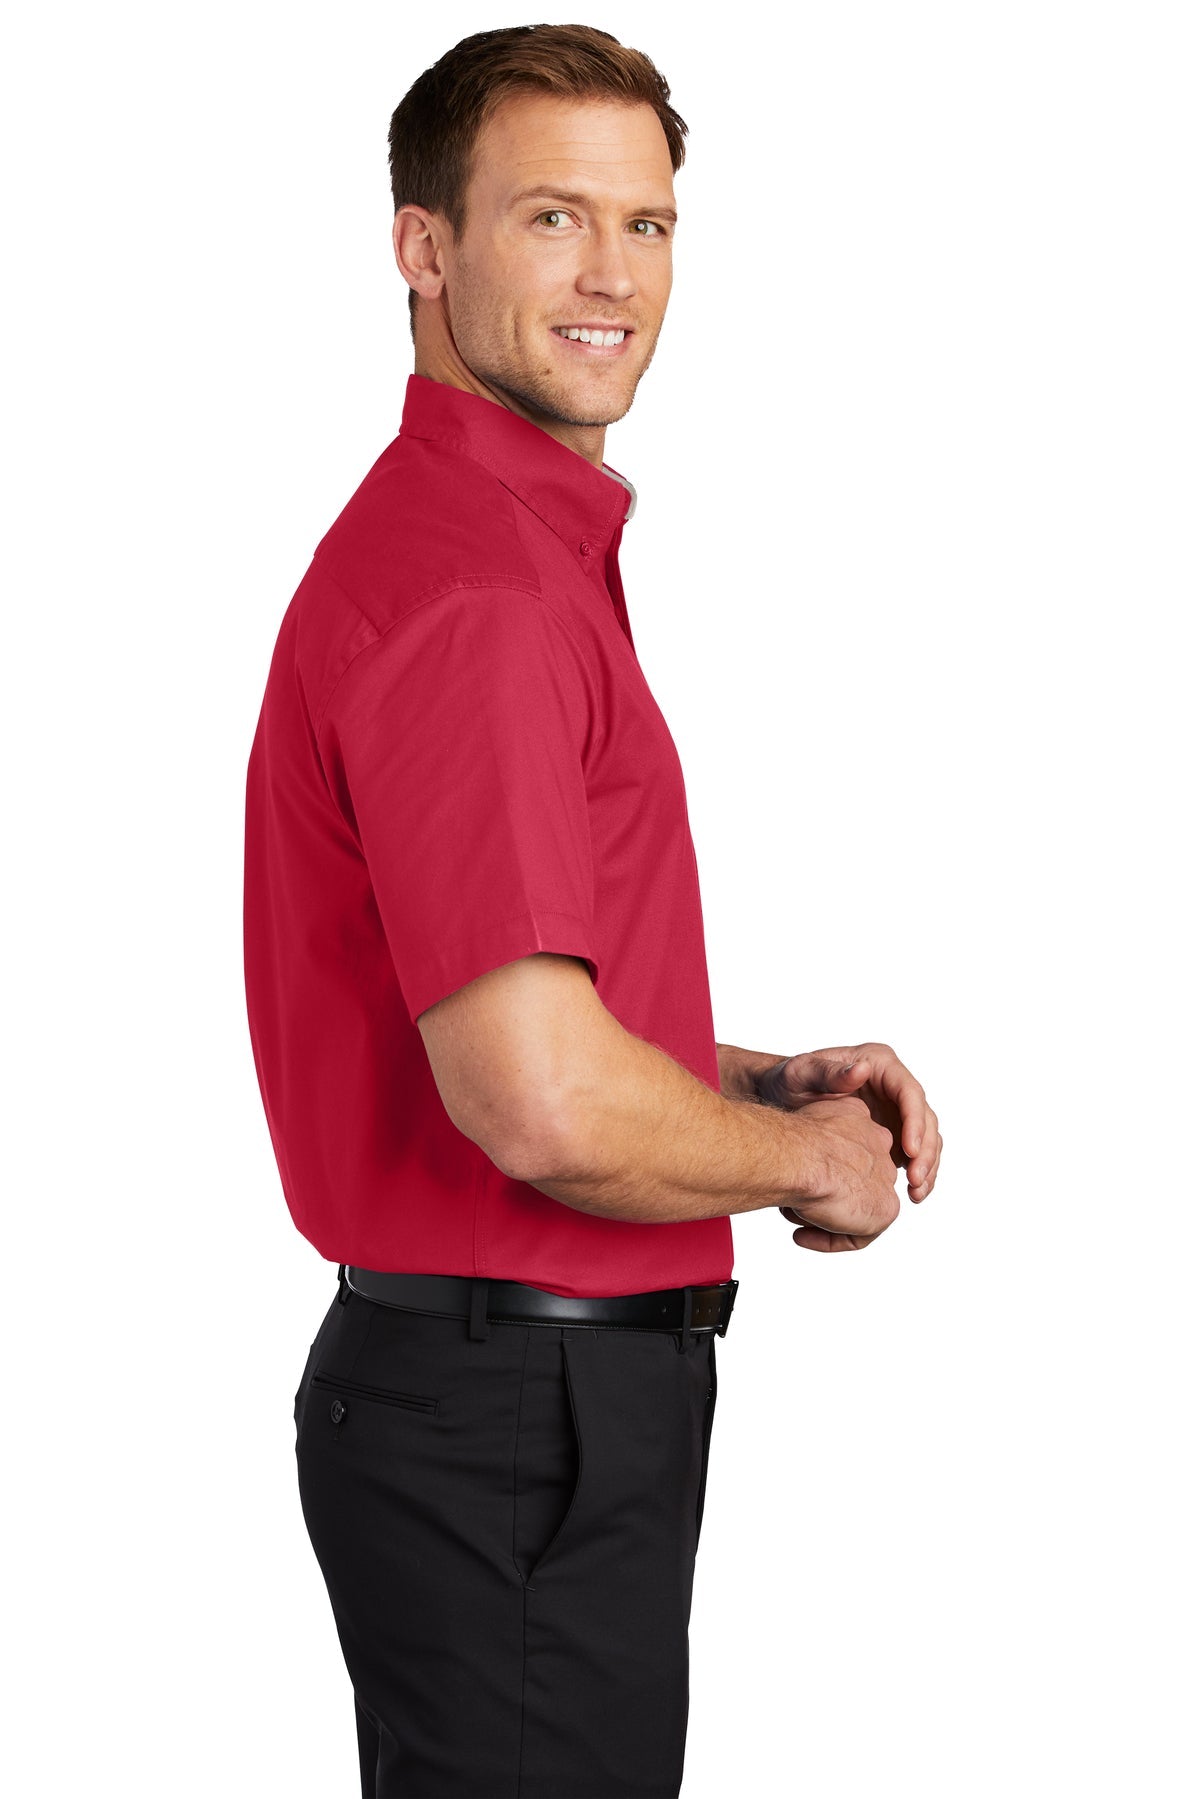 port authority_s508 _red/light stone_company_logo_button downs